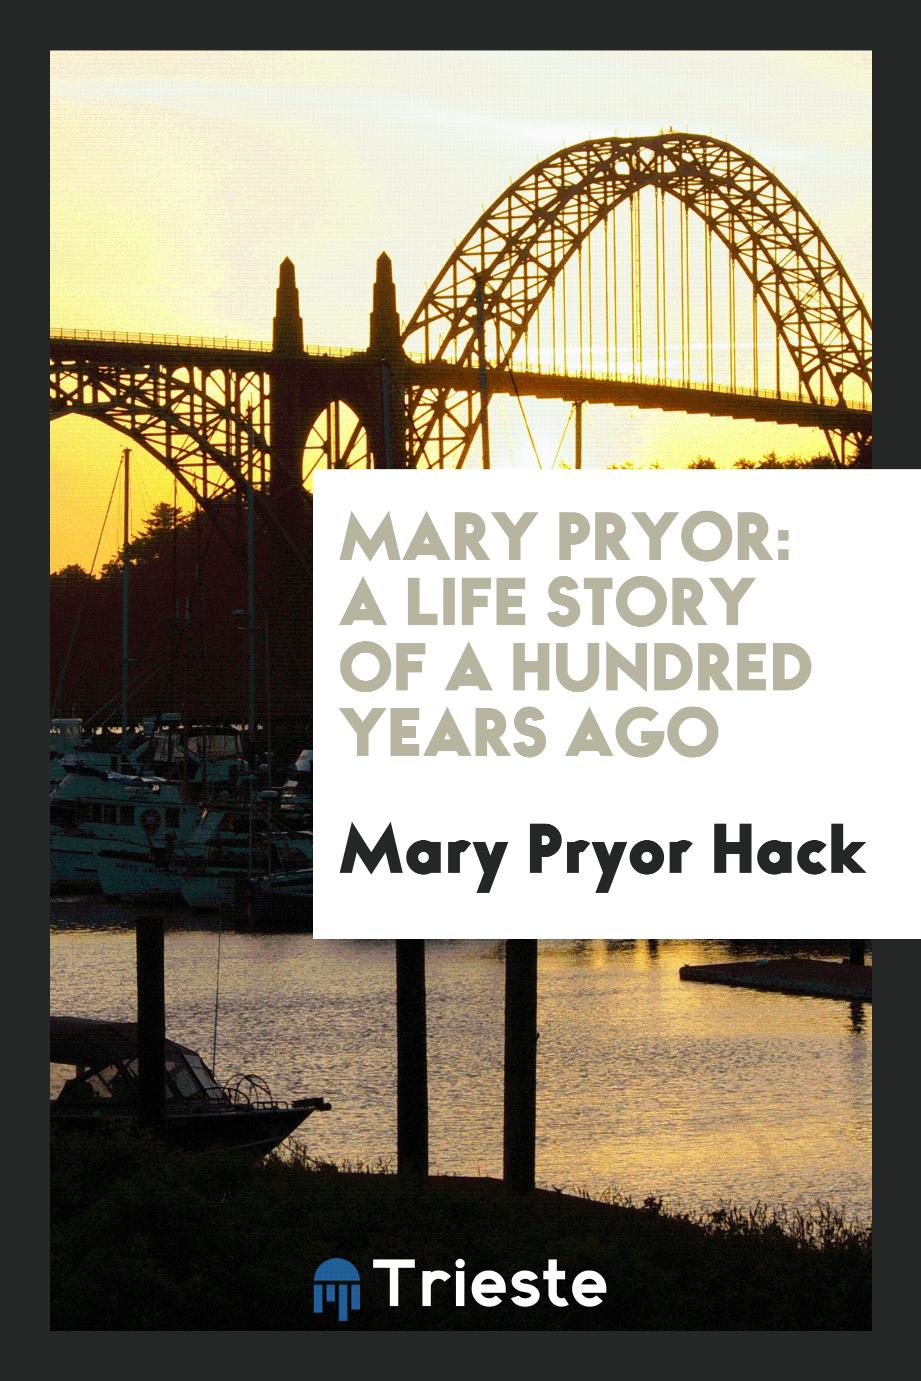 Mary Pryor: A Life Story of a Hundred Years Ago